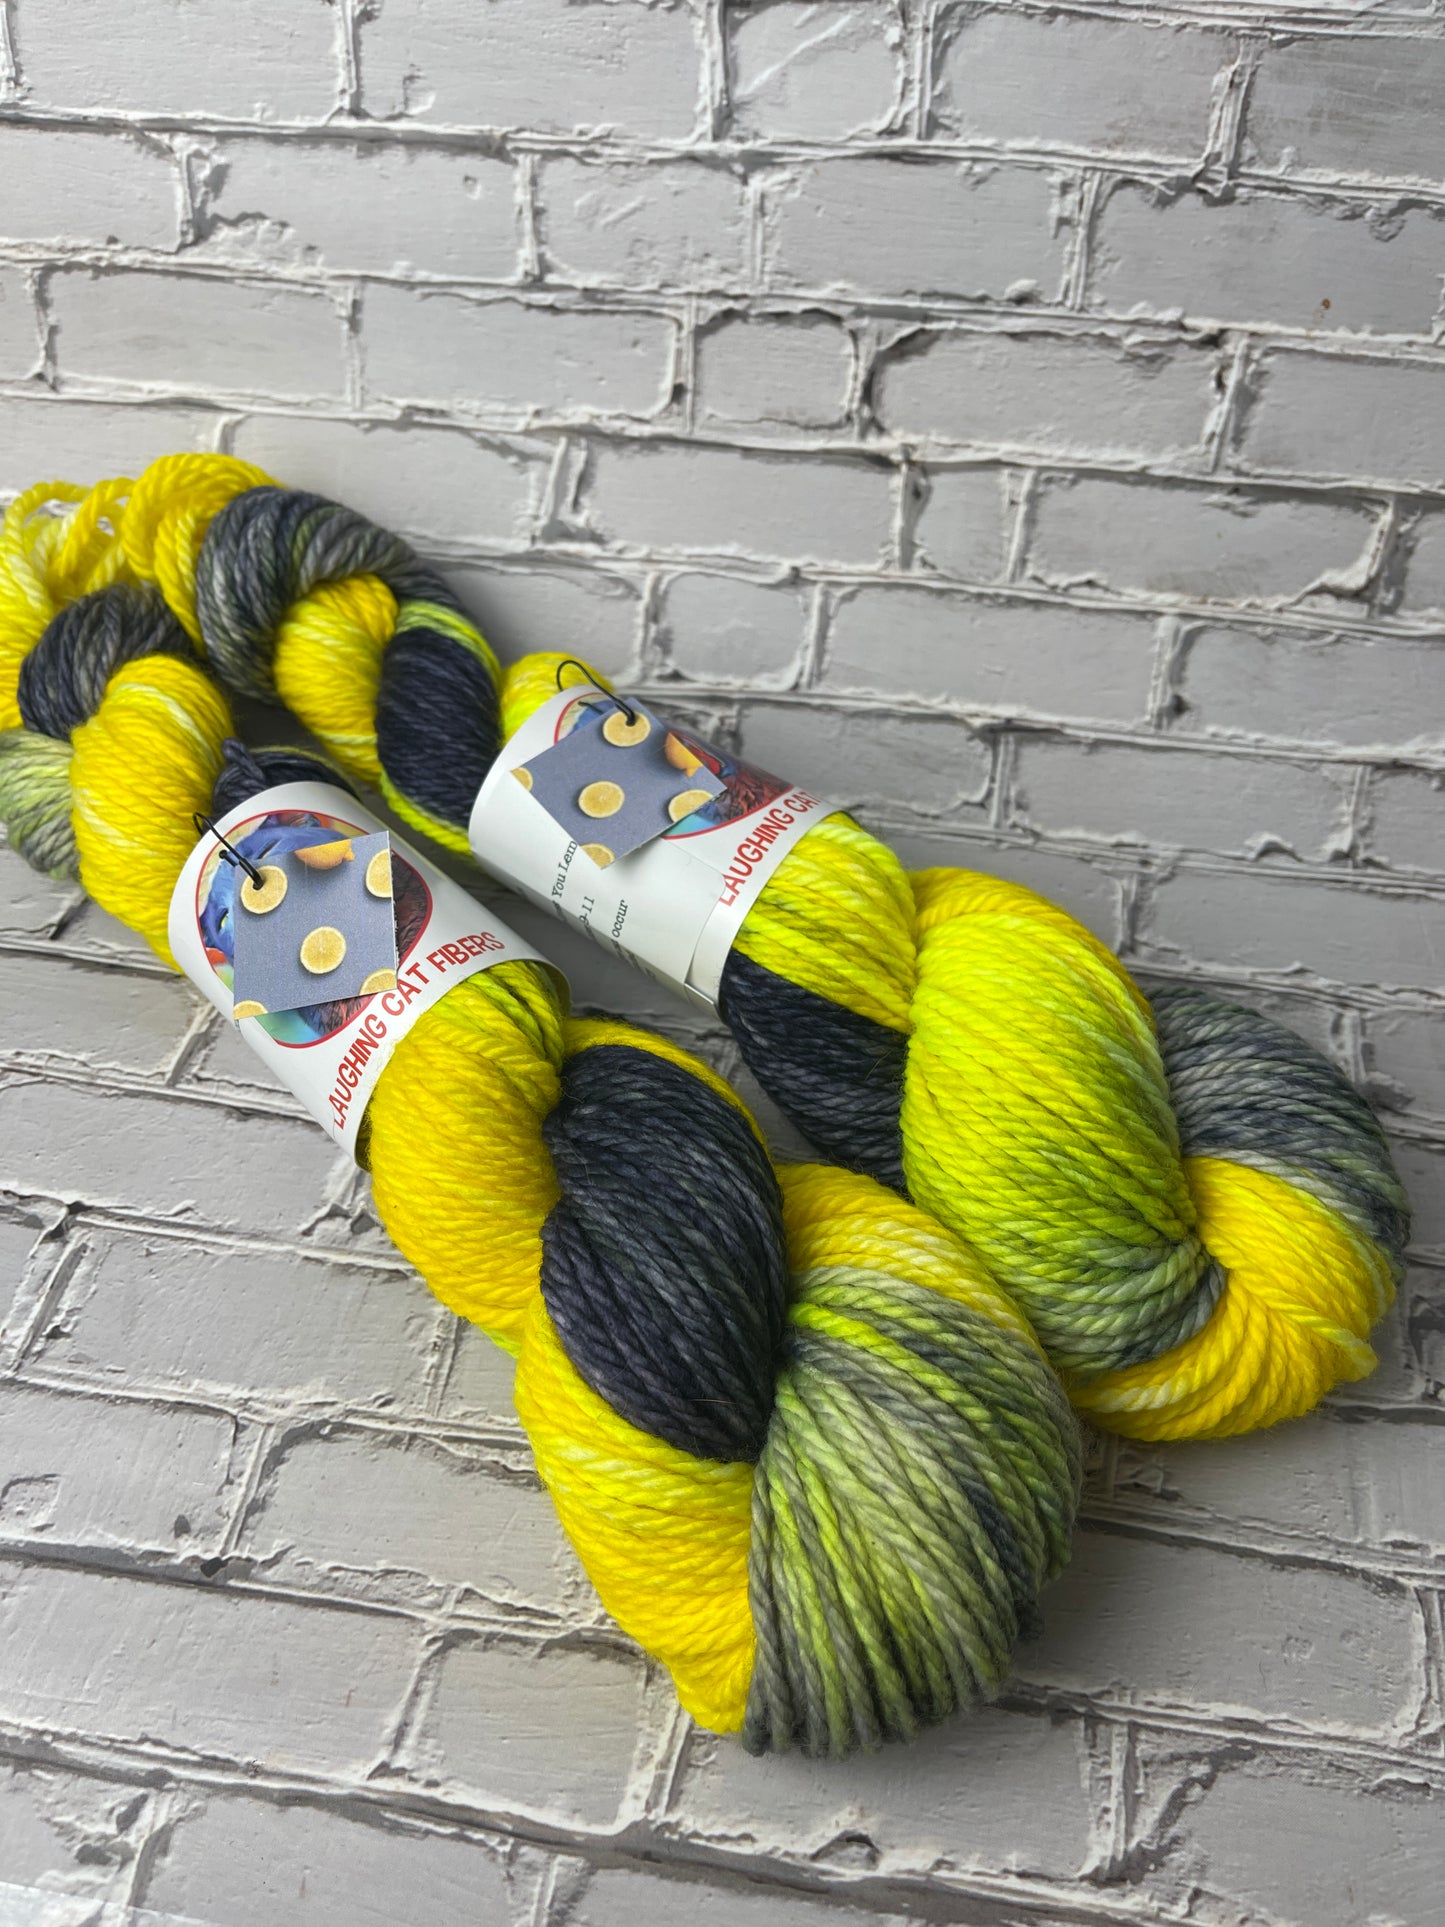 "When Life Gives You Lemons" on Various Yarn Bases